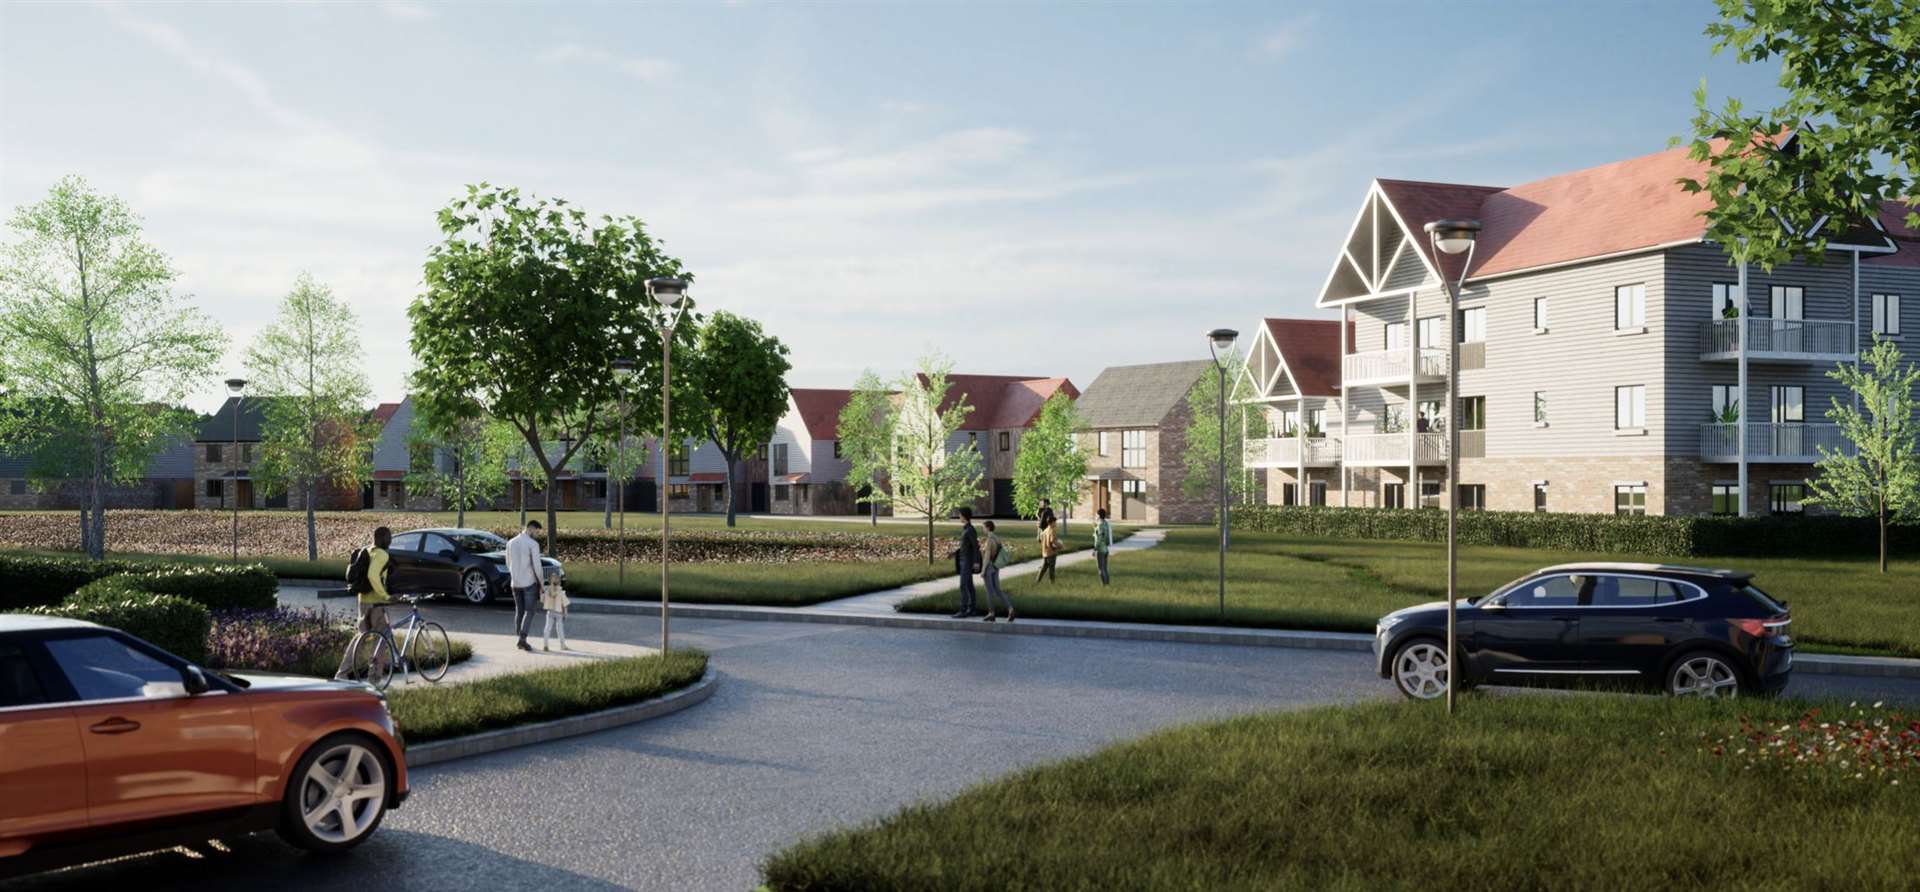 How the new estate will look according to the plans now agreed by the city council. Picture: Kitewood